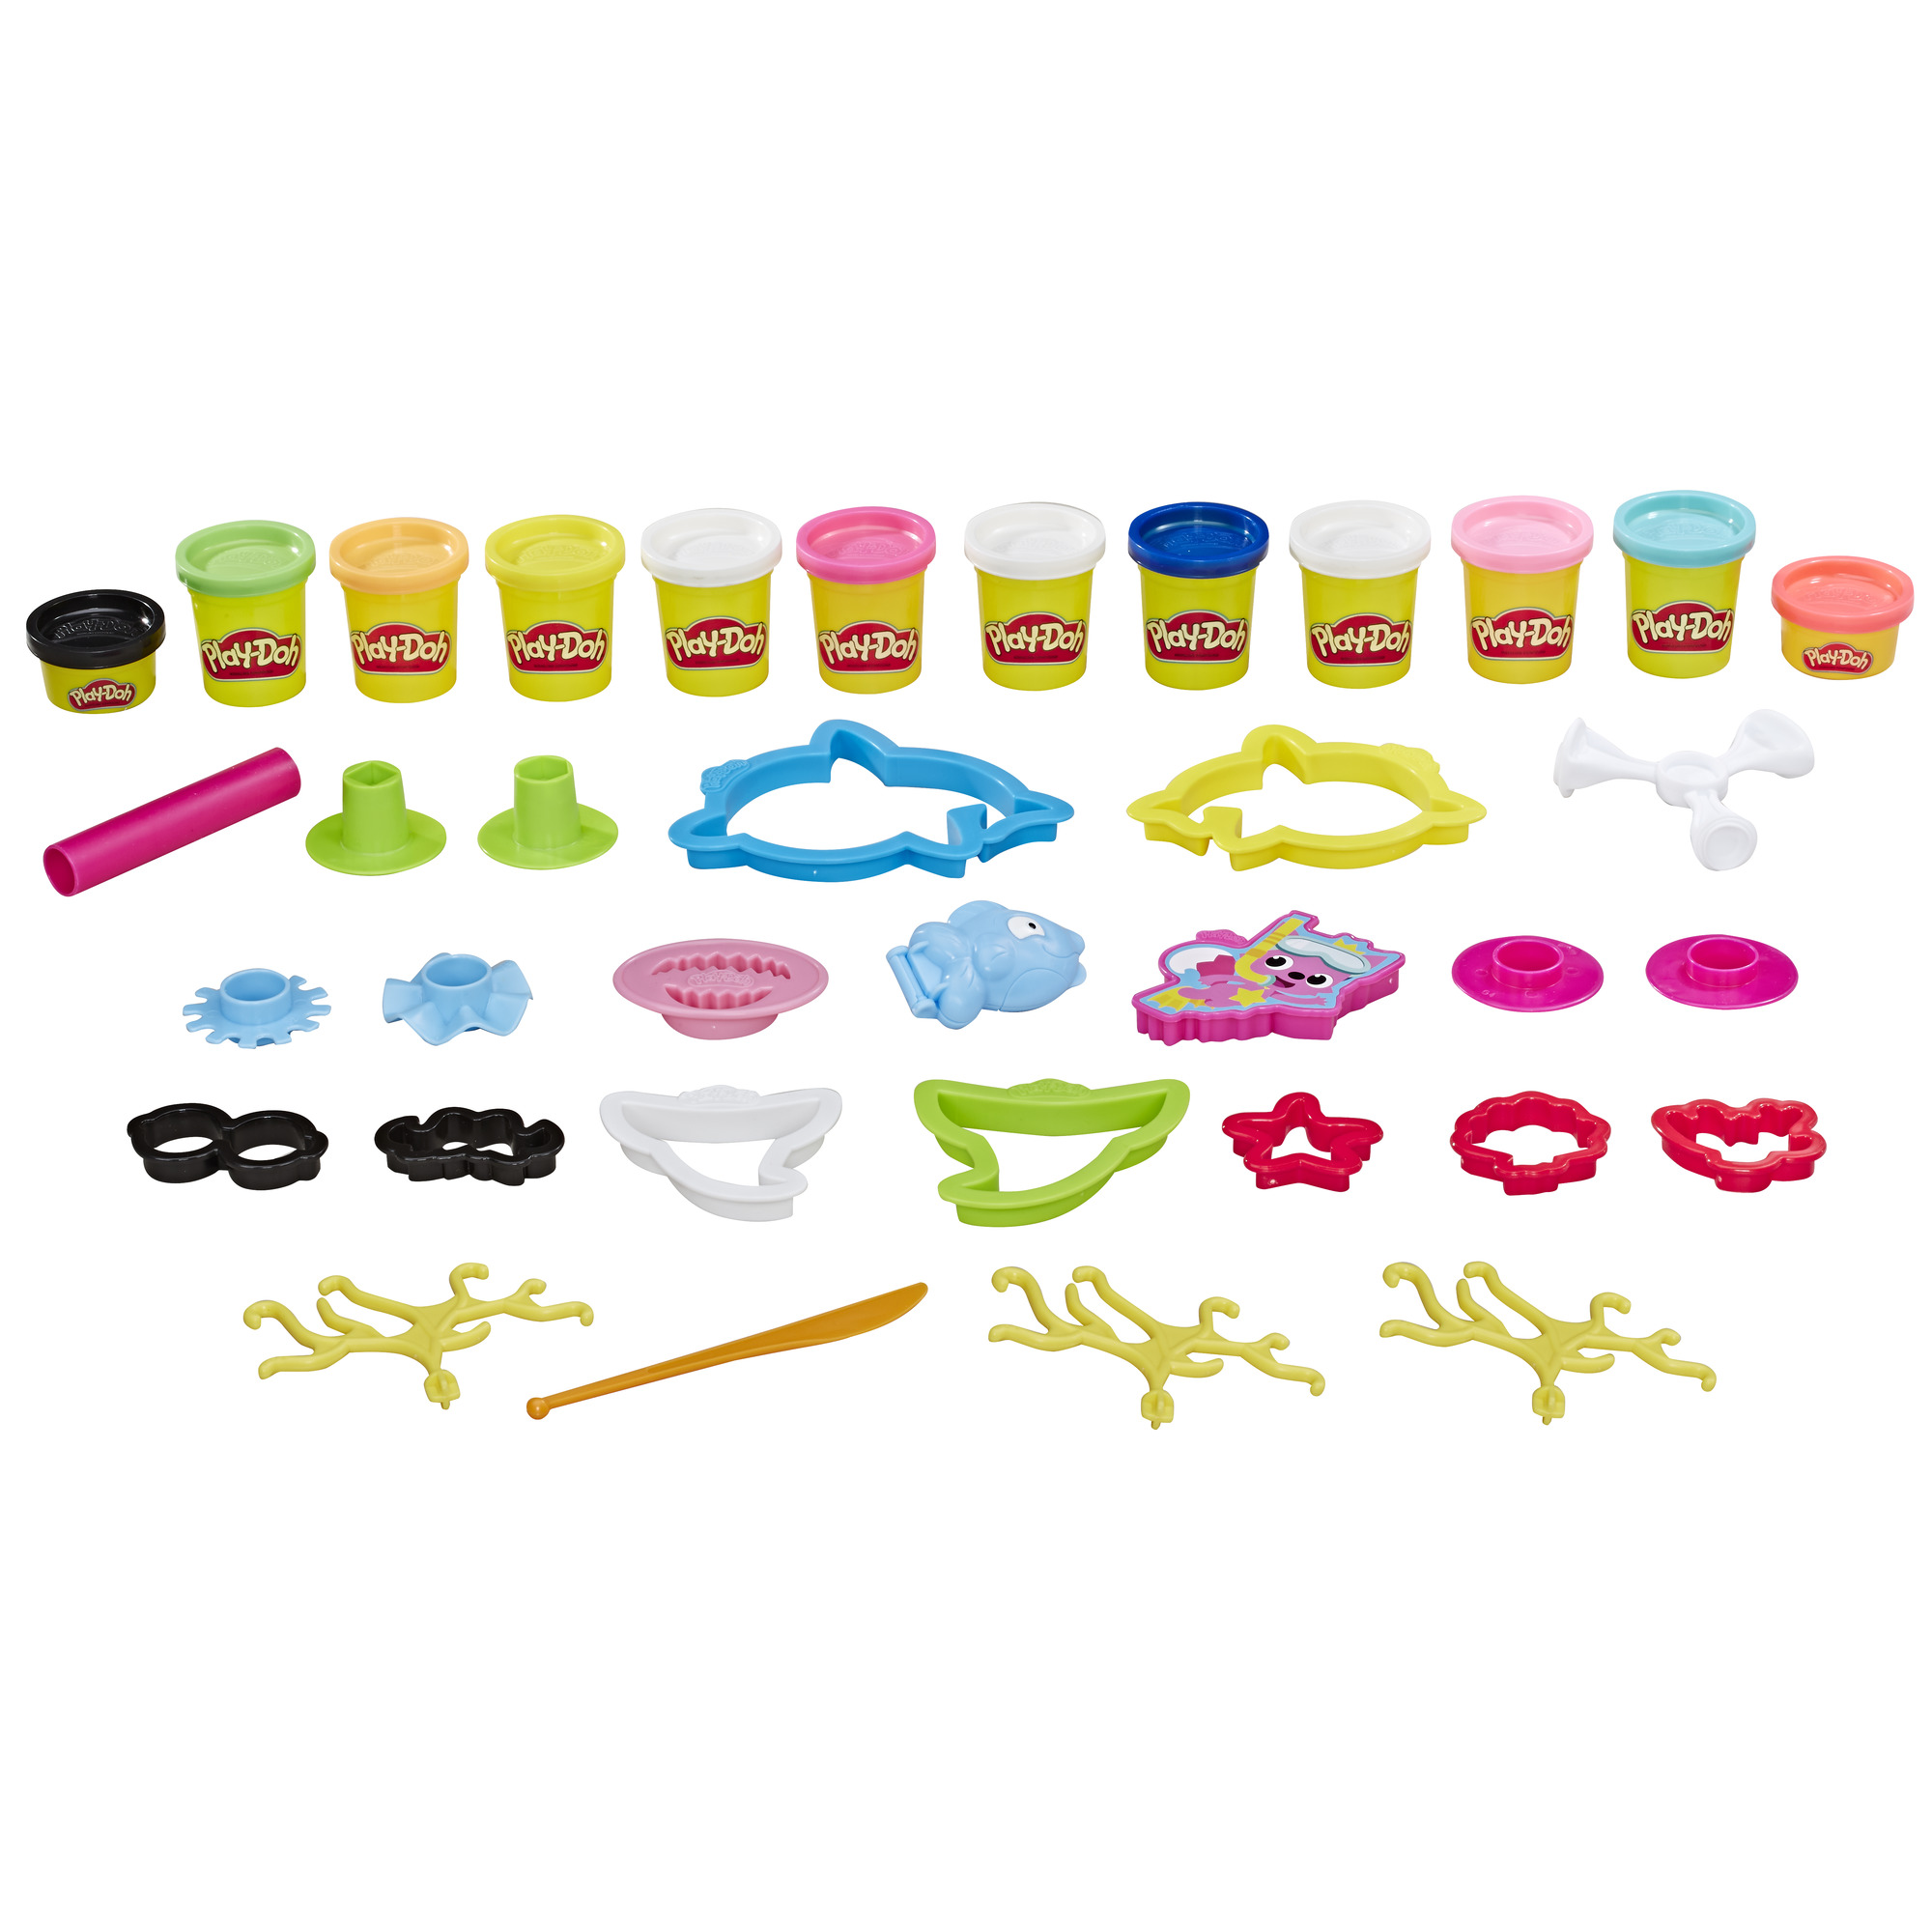 Play-Doh Pinkfong Baby Shark Set with 12 Non-Toxic Cans (22 oz) - image 3 of 8